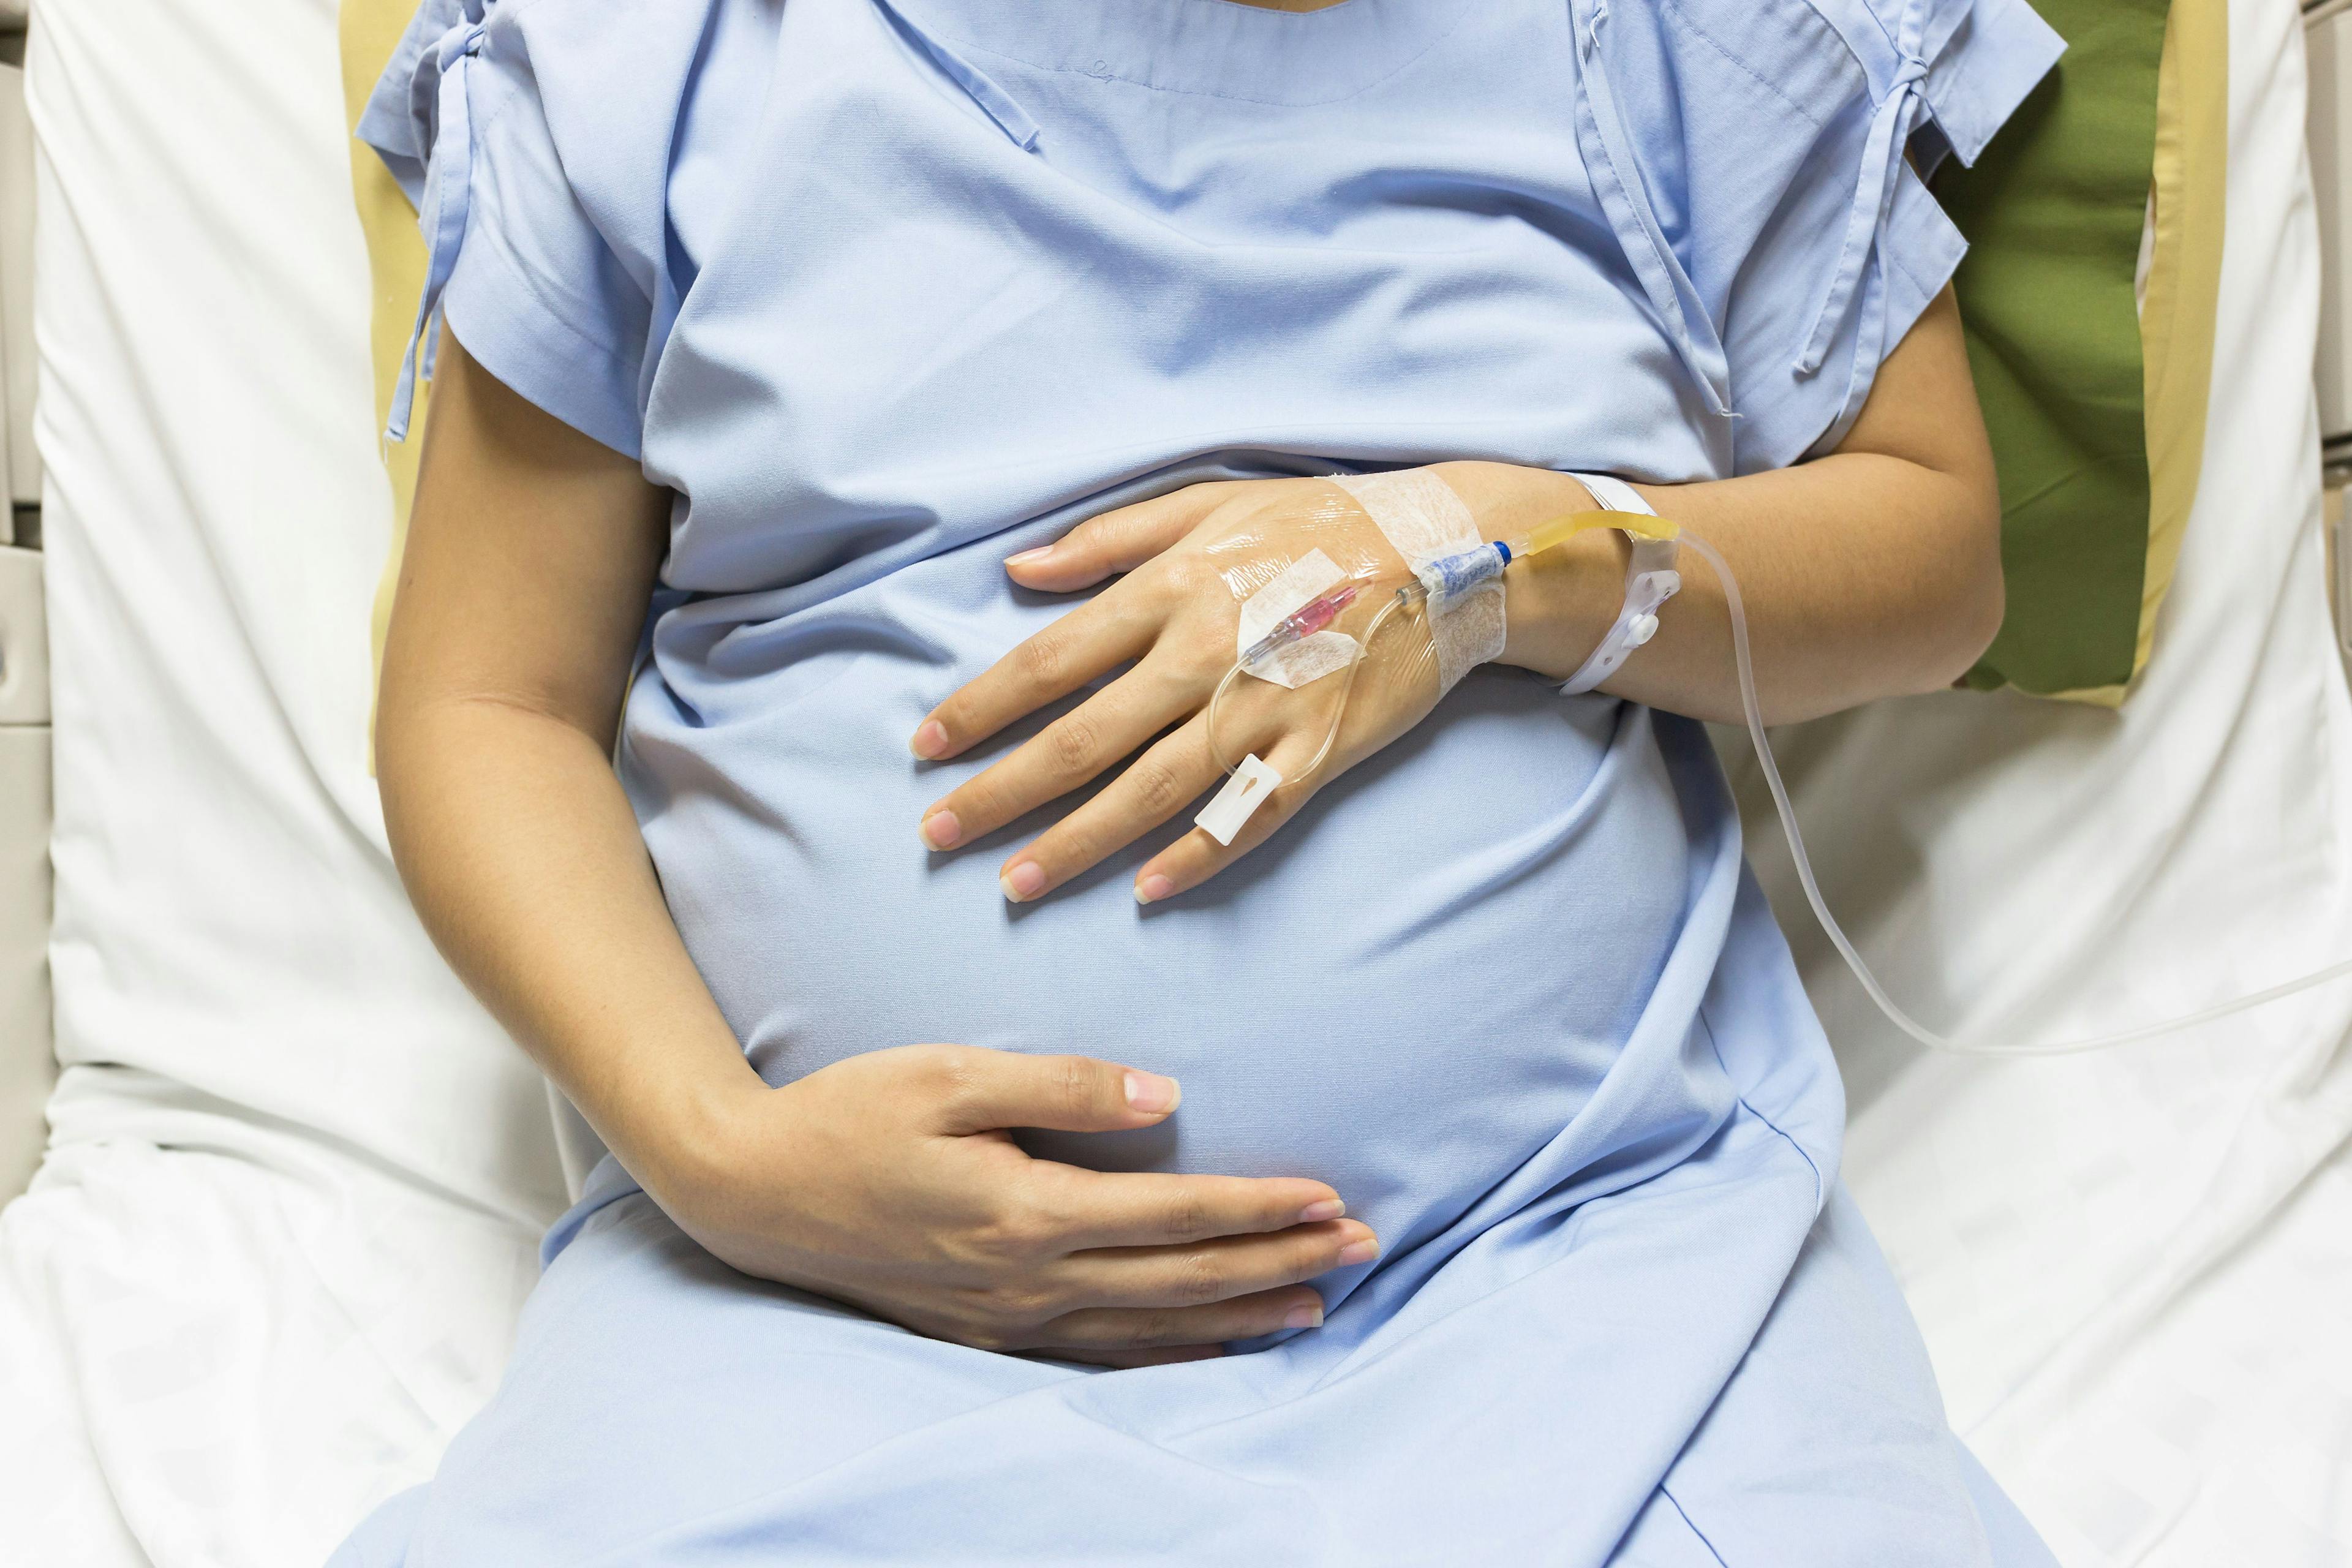 Pregnant patient in hospital bed | Image Credit: mikumistock - stock.adobe.com